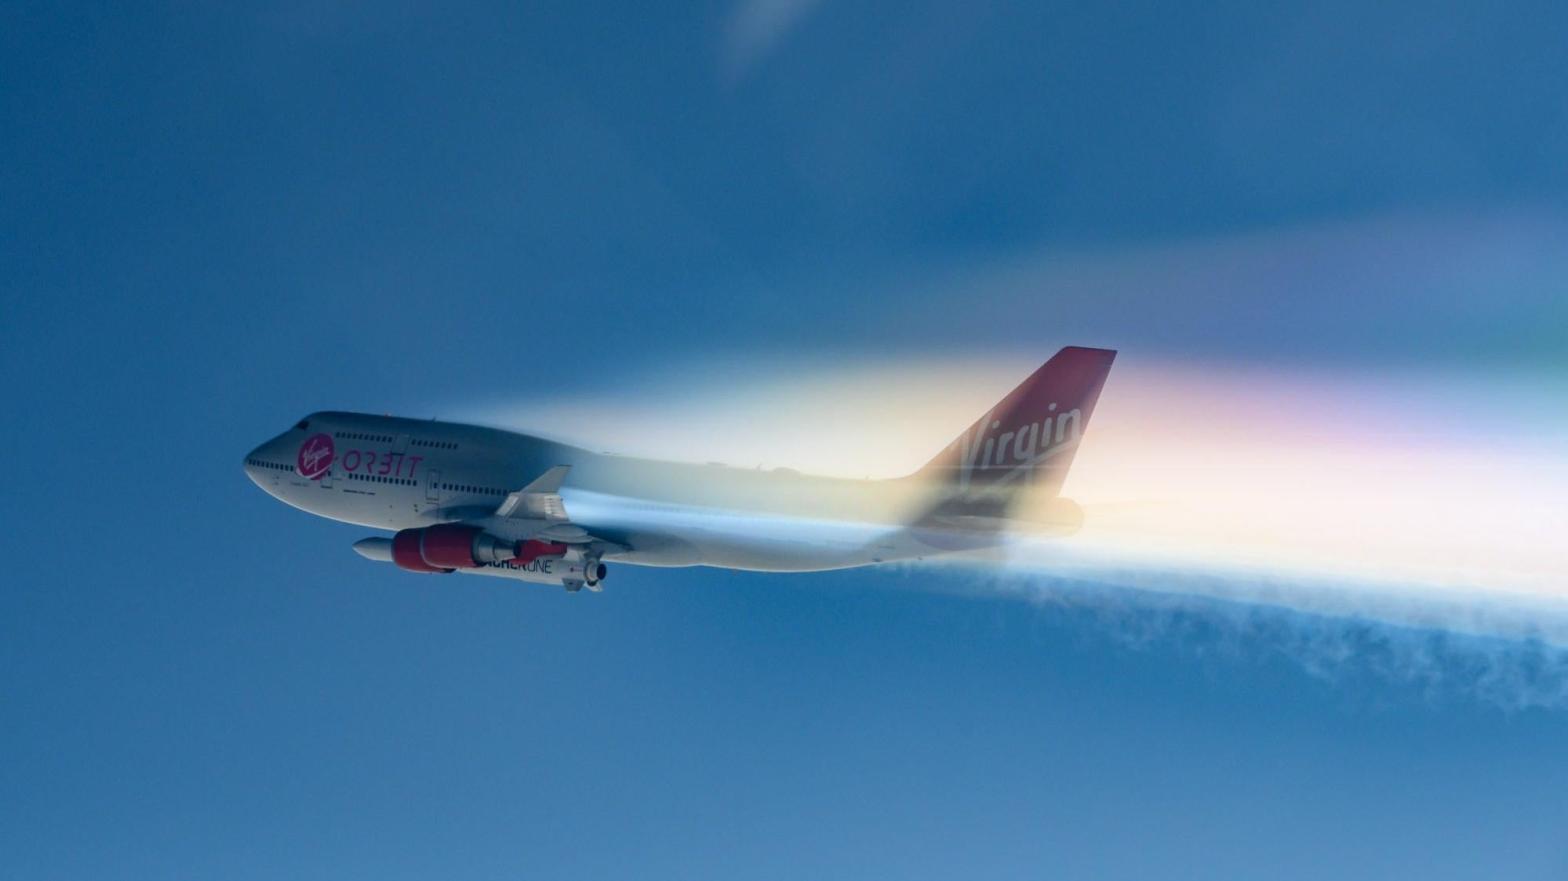 Cosmic Girl during the Above the Clouds mission in January 2022. (Image: Virgin Orbit)